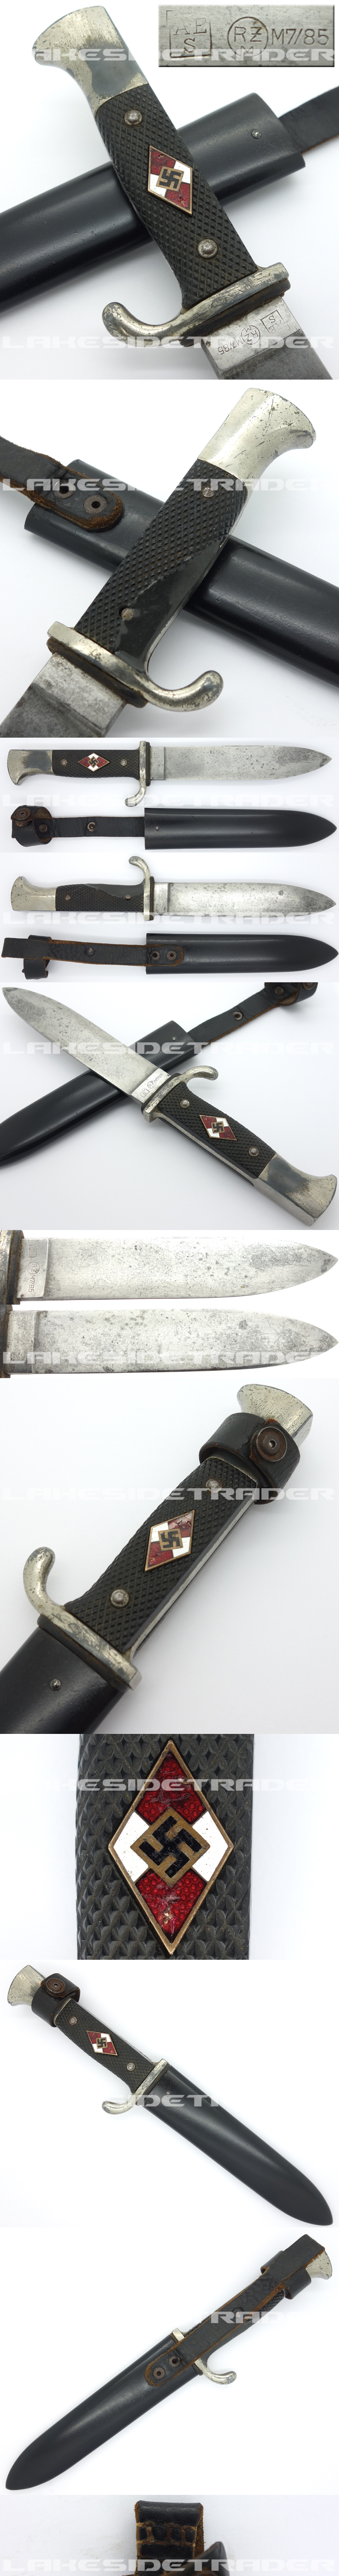 Hitler Youth Knife by AES RZM M7/85